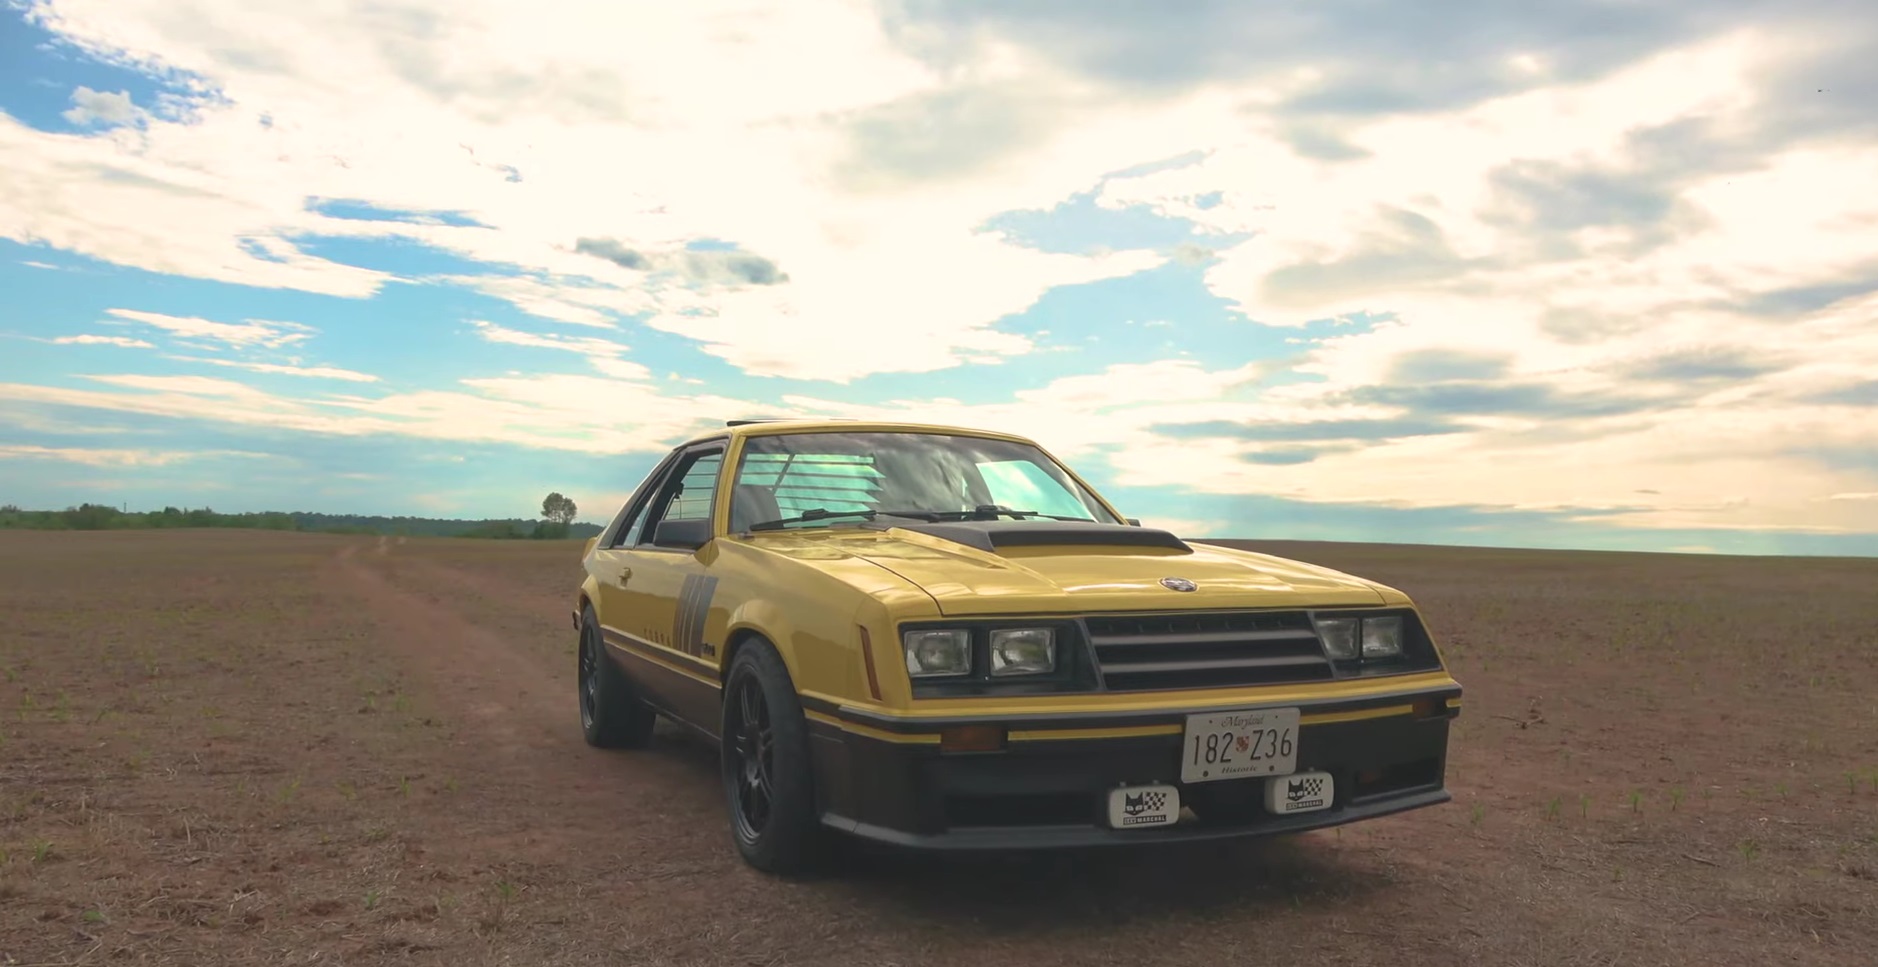 Video: 1982 Ford Mustang GT 5.0 Full Tour + Test Drive